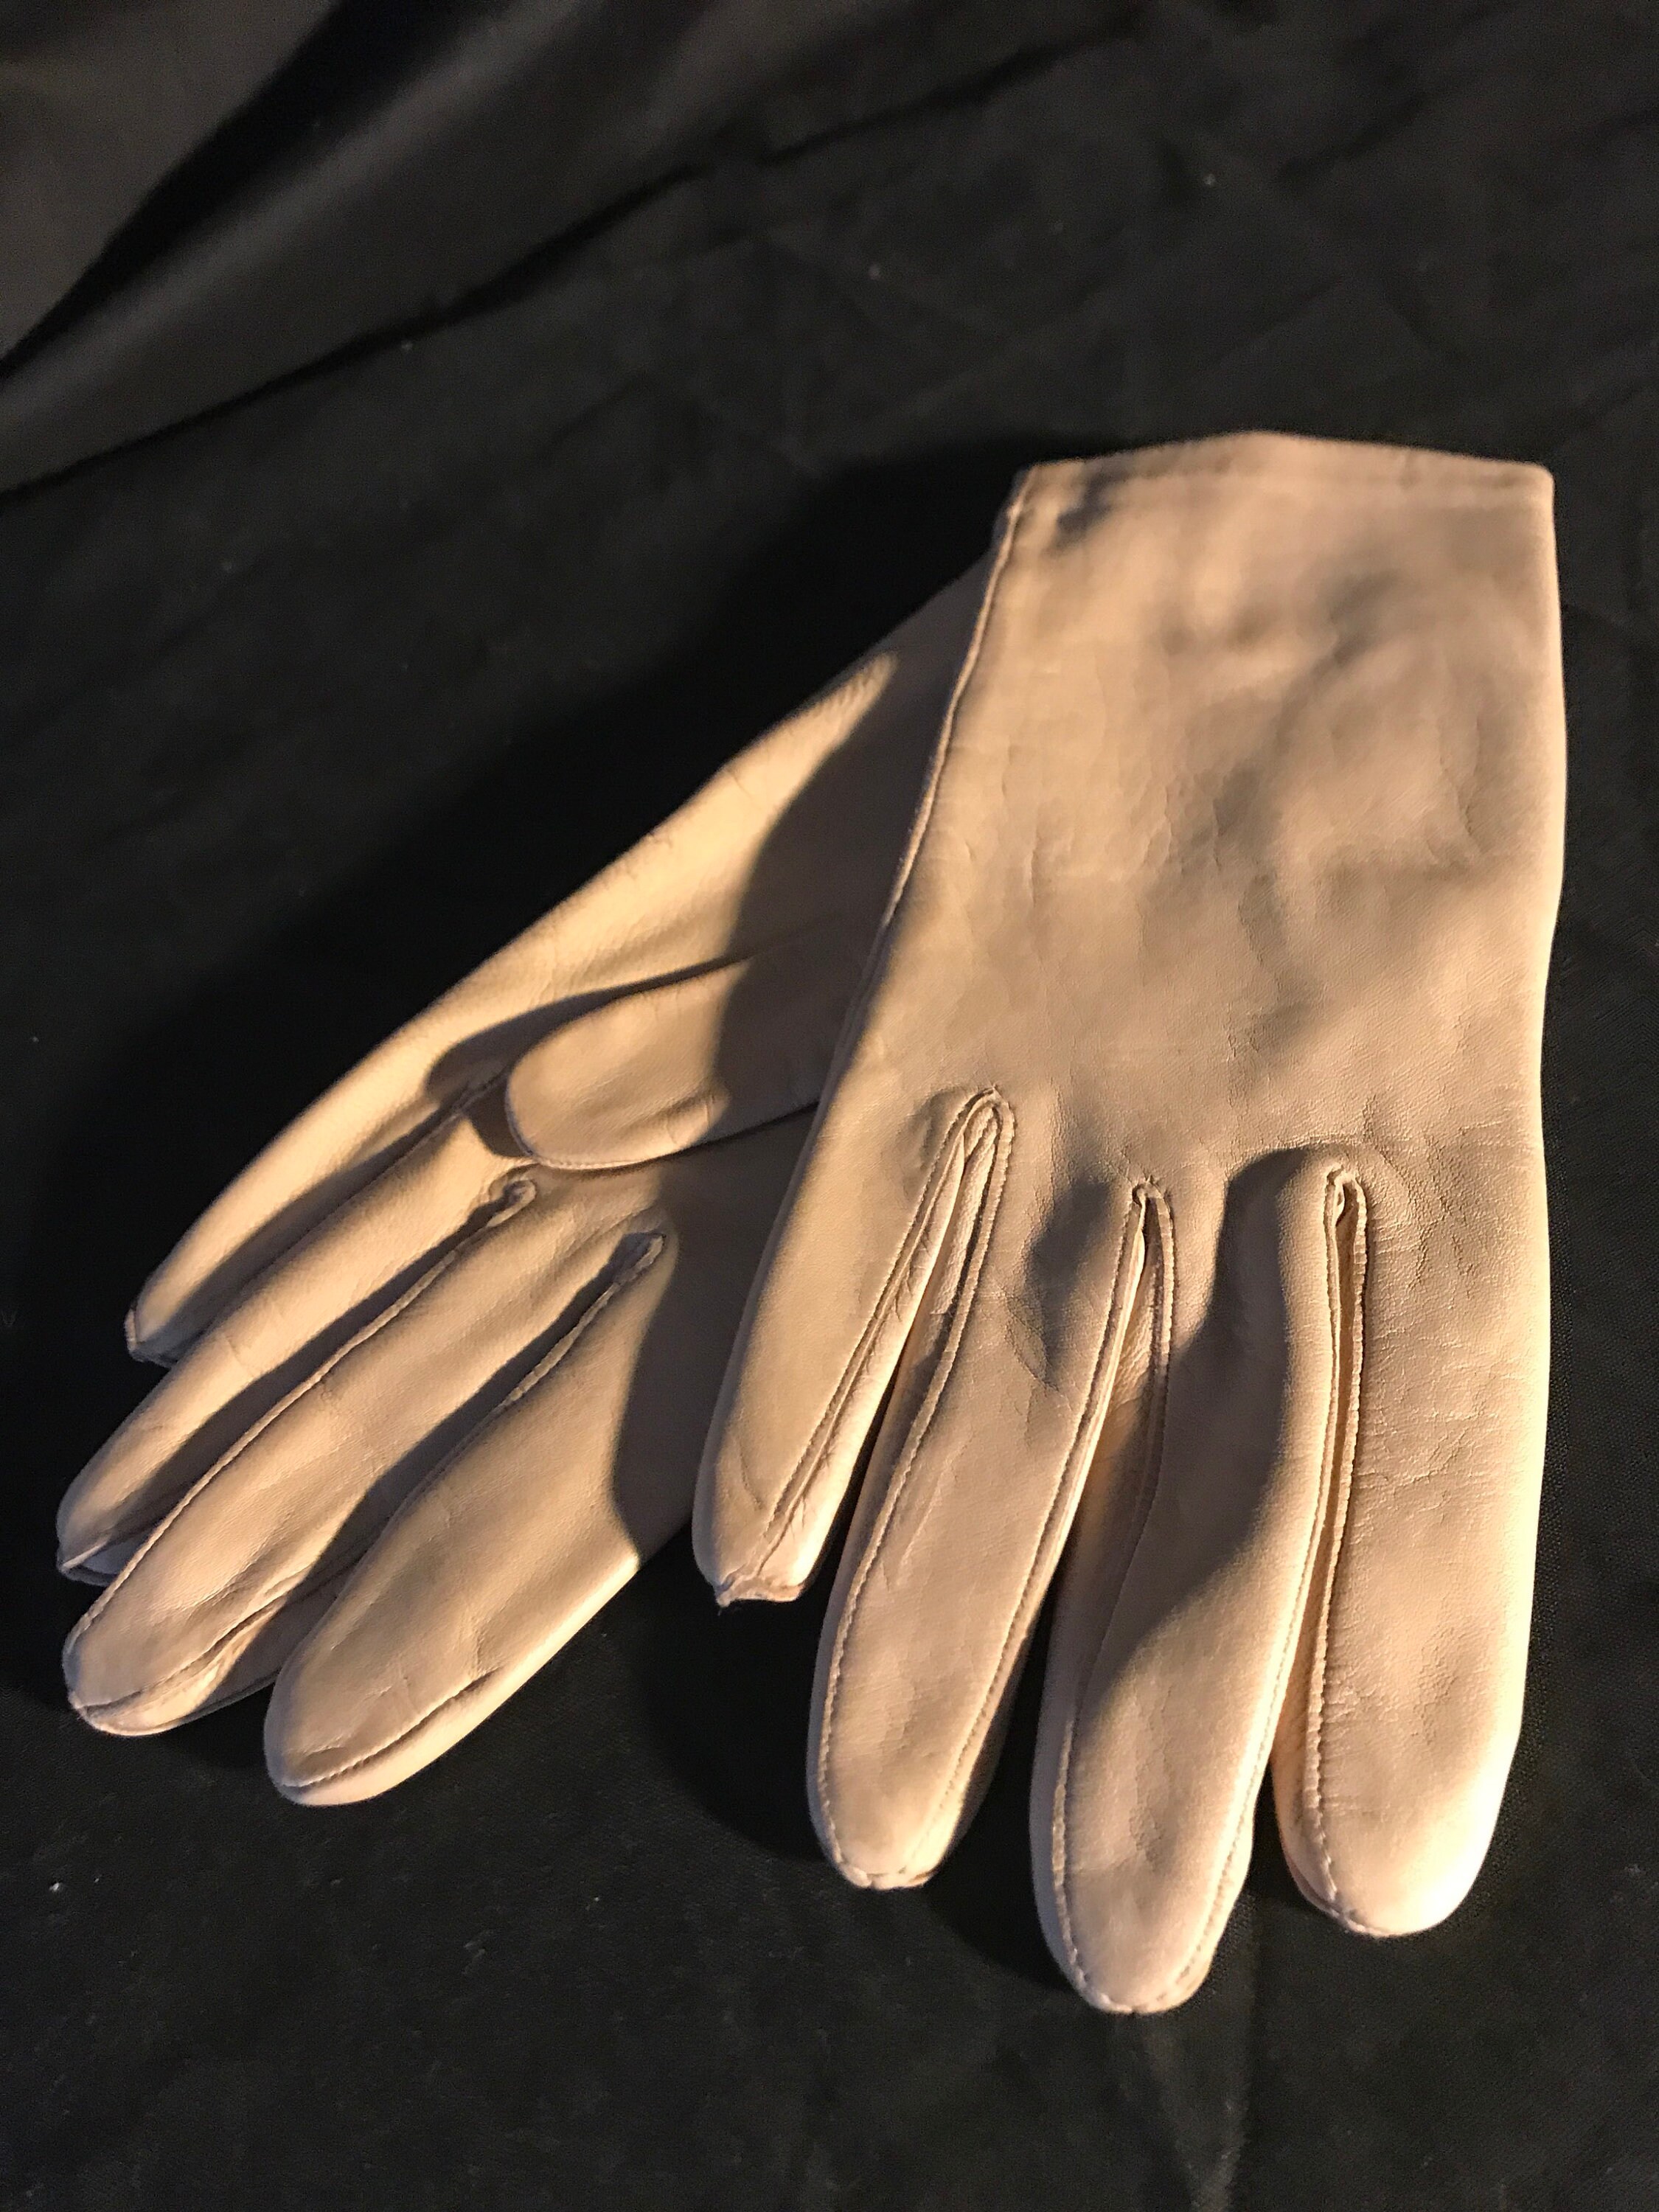 Leather gloves , driving gloves , light tan accessories - light weight new  gloves